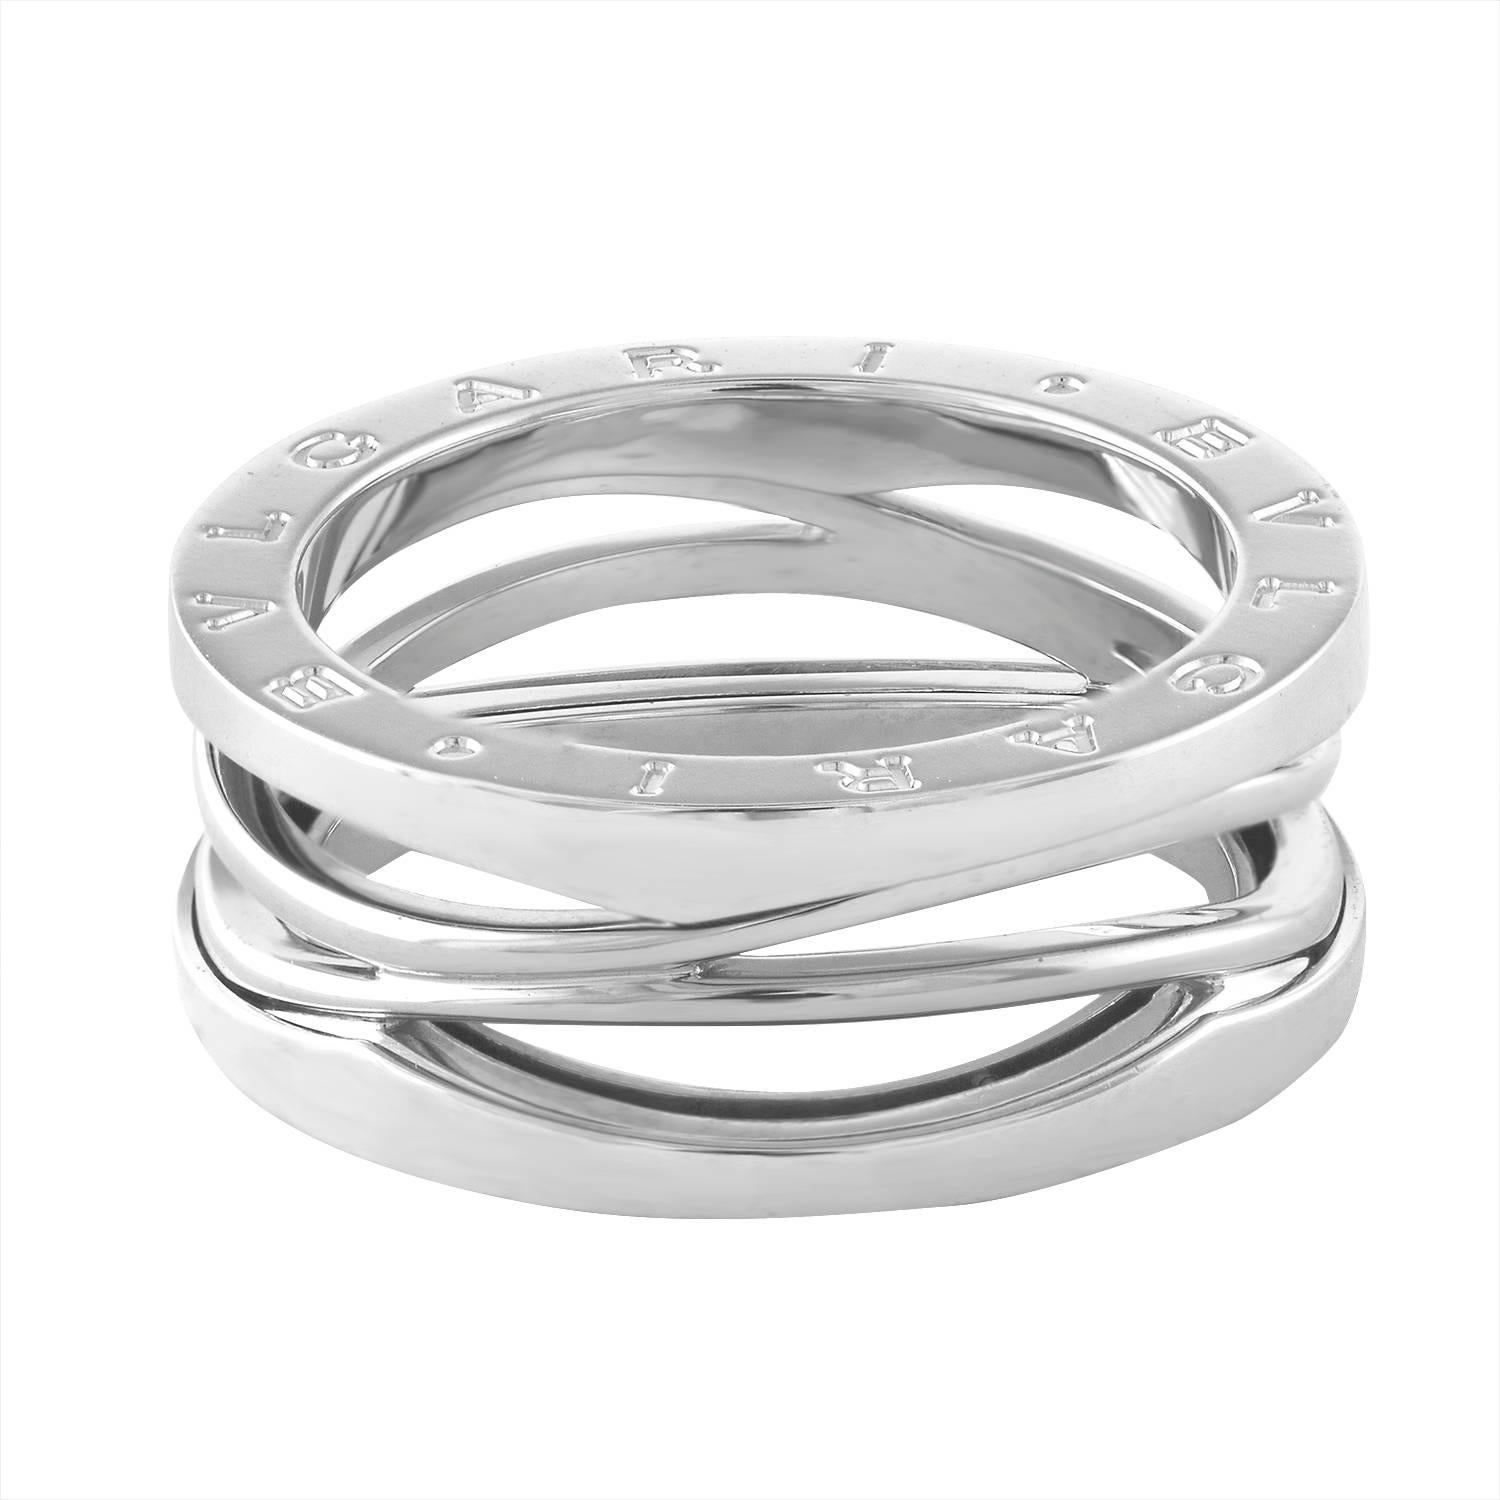 Bulgari B.Zero 1 Design Legend
This is a 3 Band Ring
The ring is 18K White Gold
The ring is a size 61 or 9.5
Comes with Original Box
The ring weighs 12.2 grams
